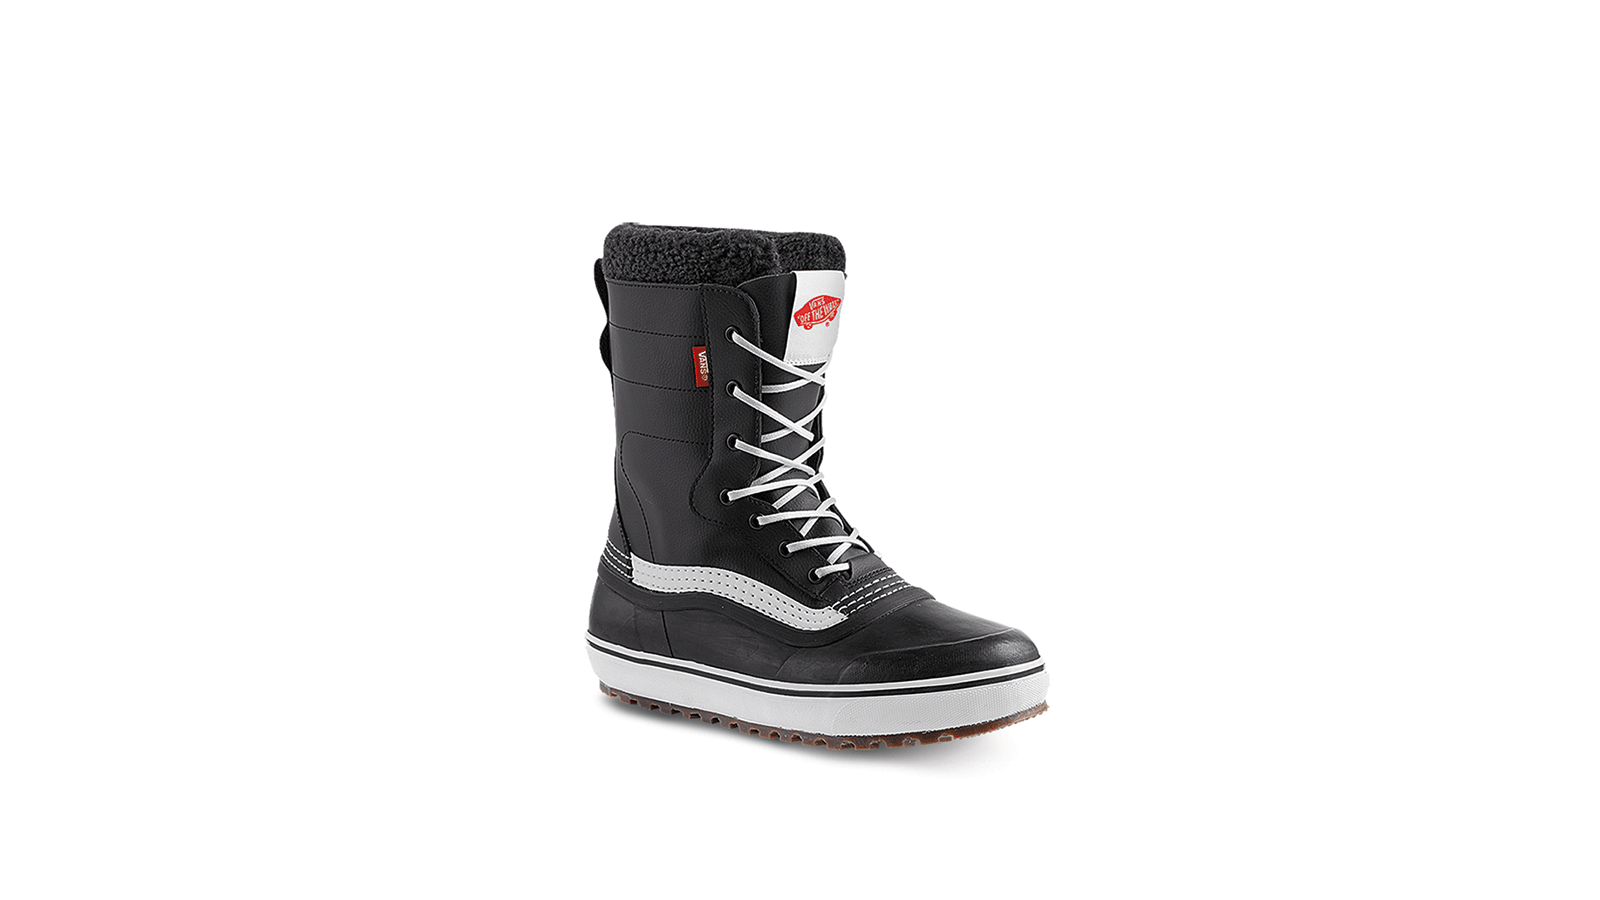 Vans FW19/20 Snowboard Boots Preview 